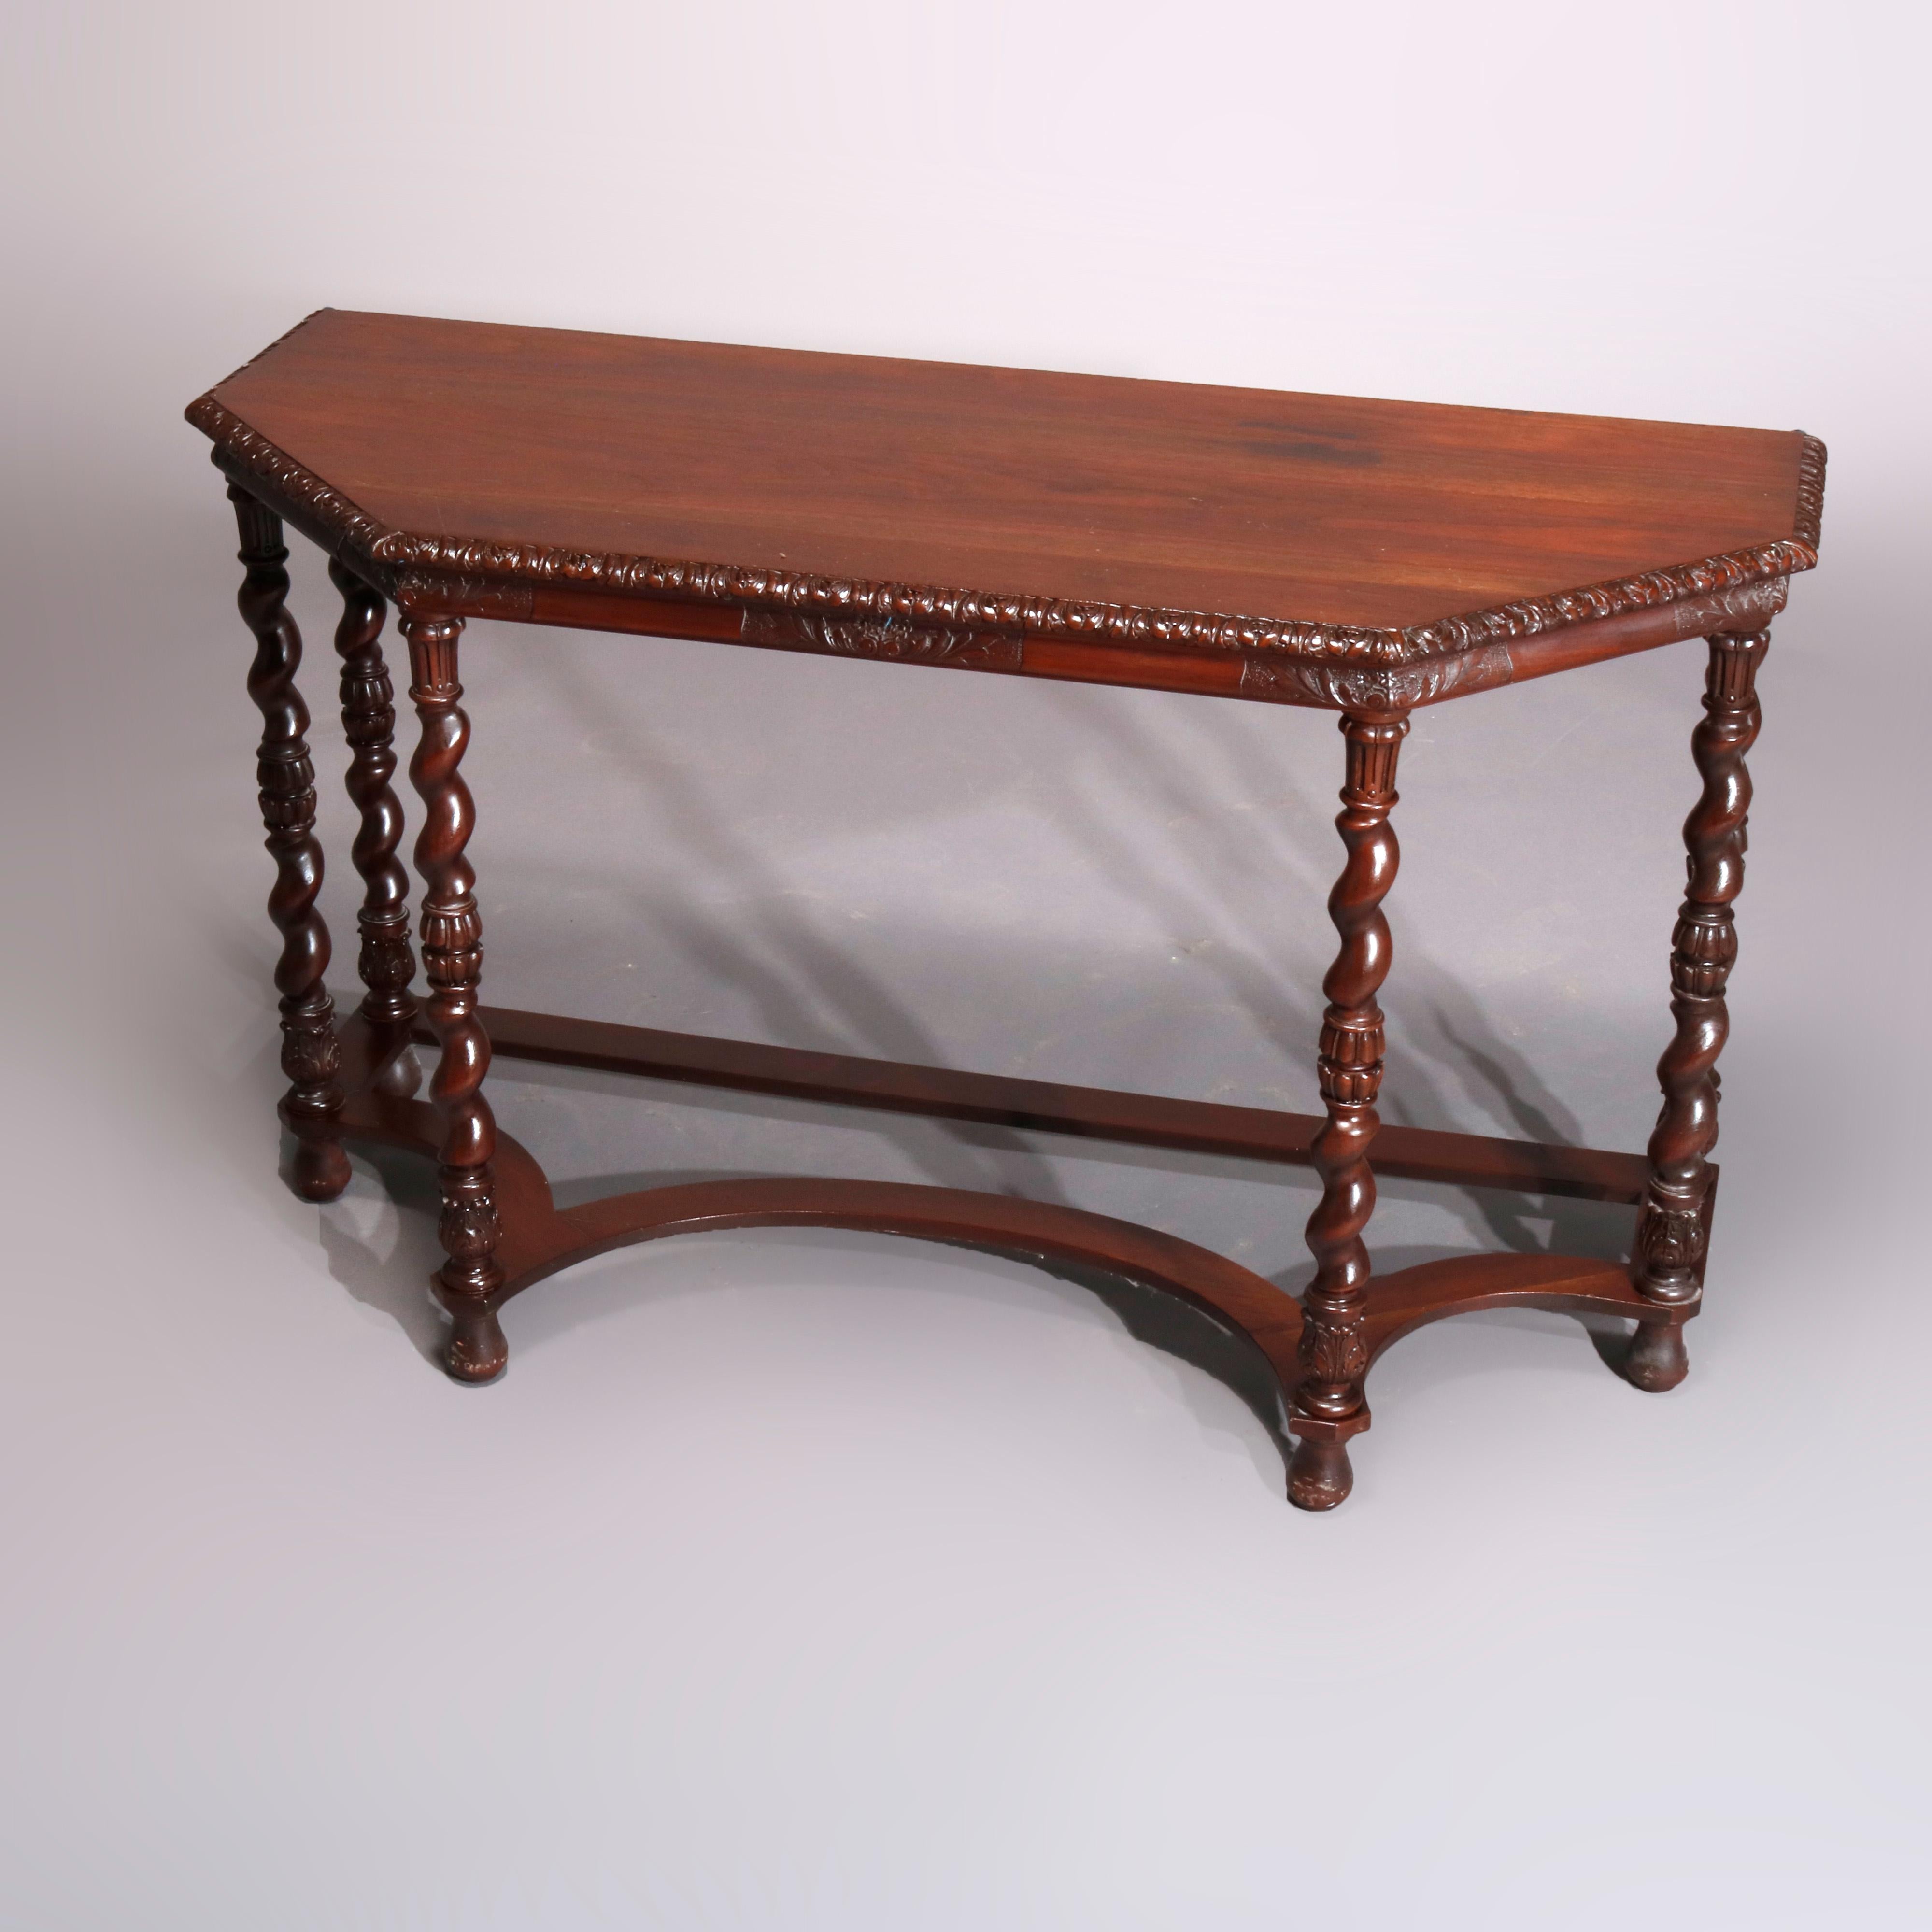 20th Century Antique Elizabethan Carved Mahogany Barley Twist and Acanthus Console Table